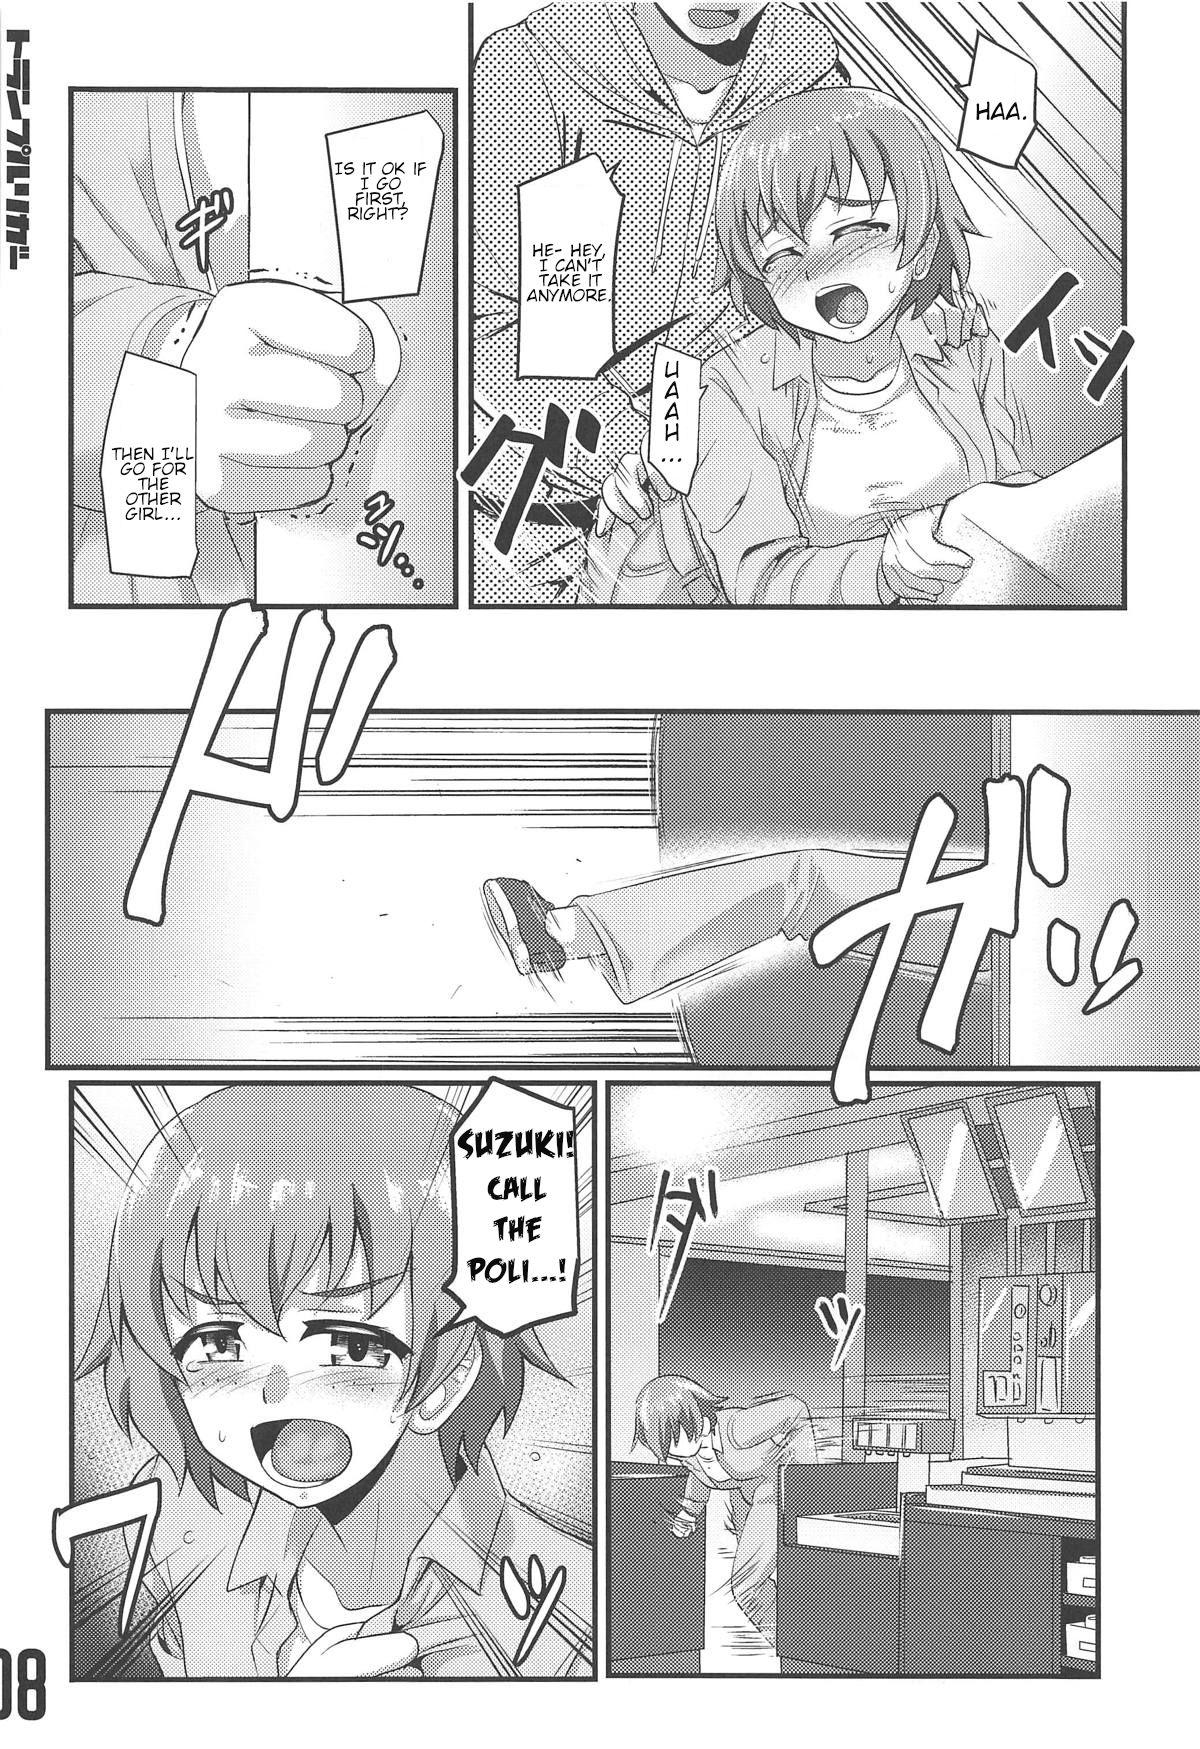 Anime Fry-day OARAI TOWN - Girls und panzer Home - Page 7